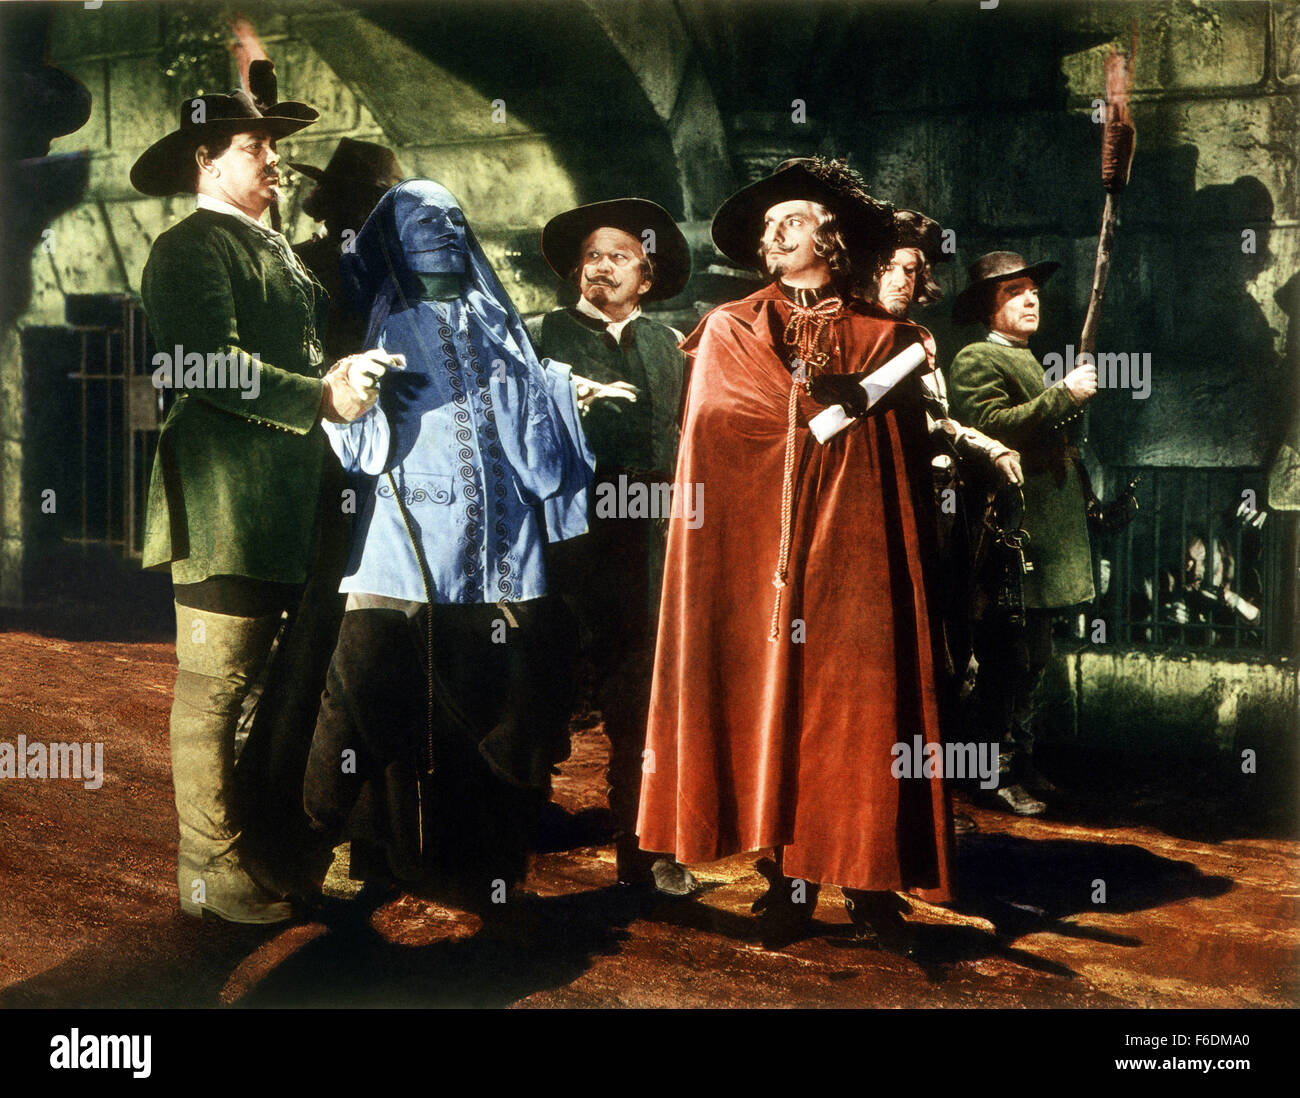 RELEASED: Jun - Original Film Title: The Man the Iron Mask. PICTURED: Scene from the Stock Photo - Alamy